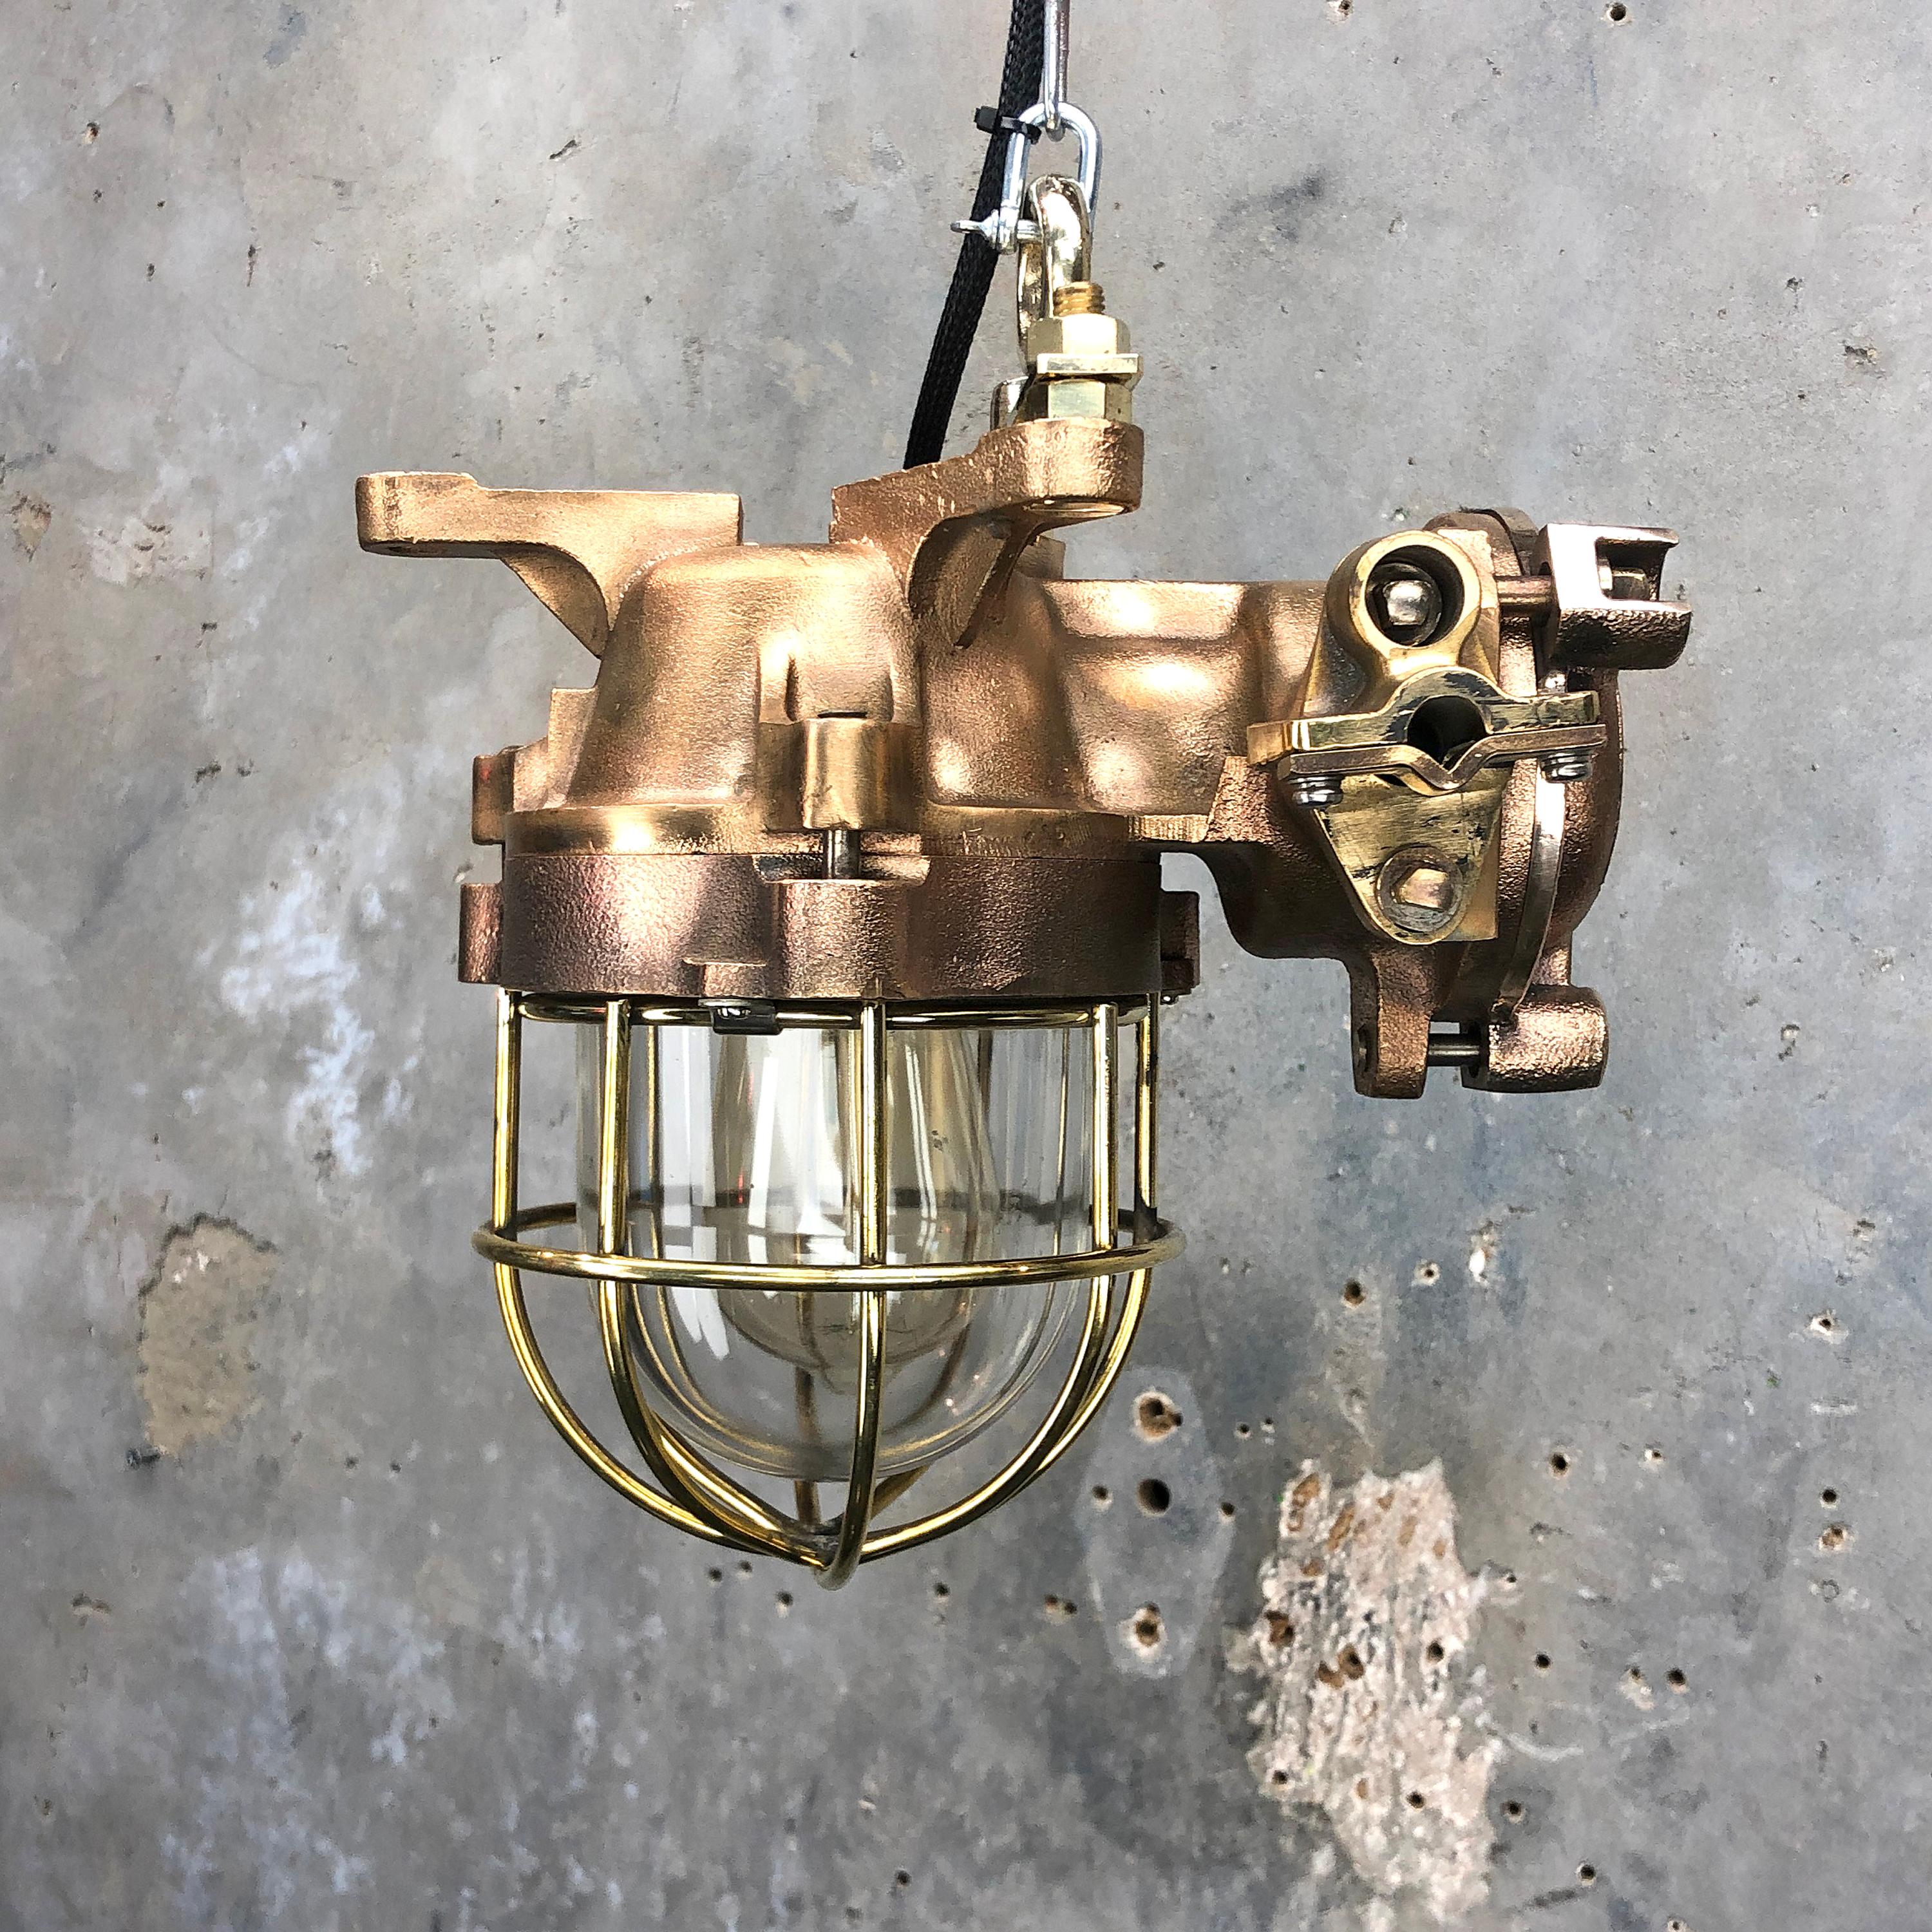 Vintage Industrial Japanese flameproof cast bronze ceiling light fitted with Edison squirrel cage filament bulb made in the 1990s by Kokosha - Osaka, Japan. These fixtures also feature brass cable grips and brass wire cage.

These flameproof rated